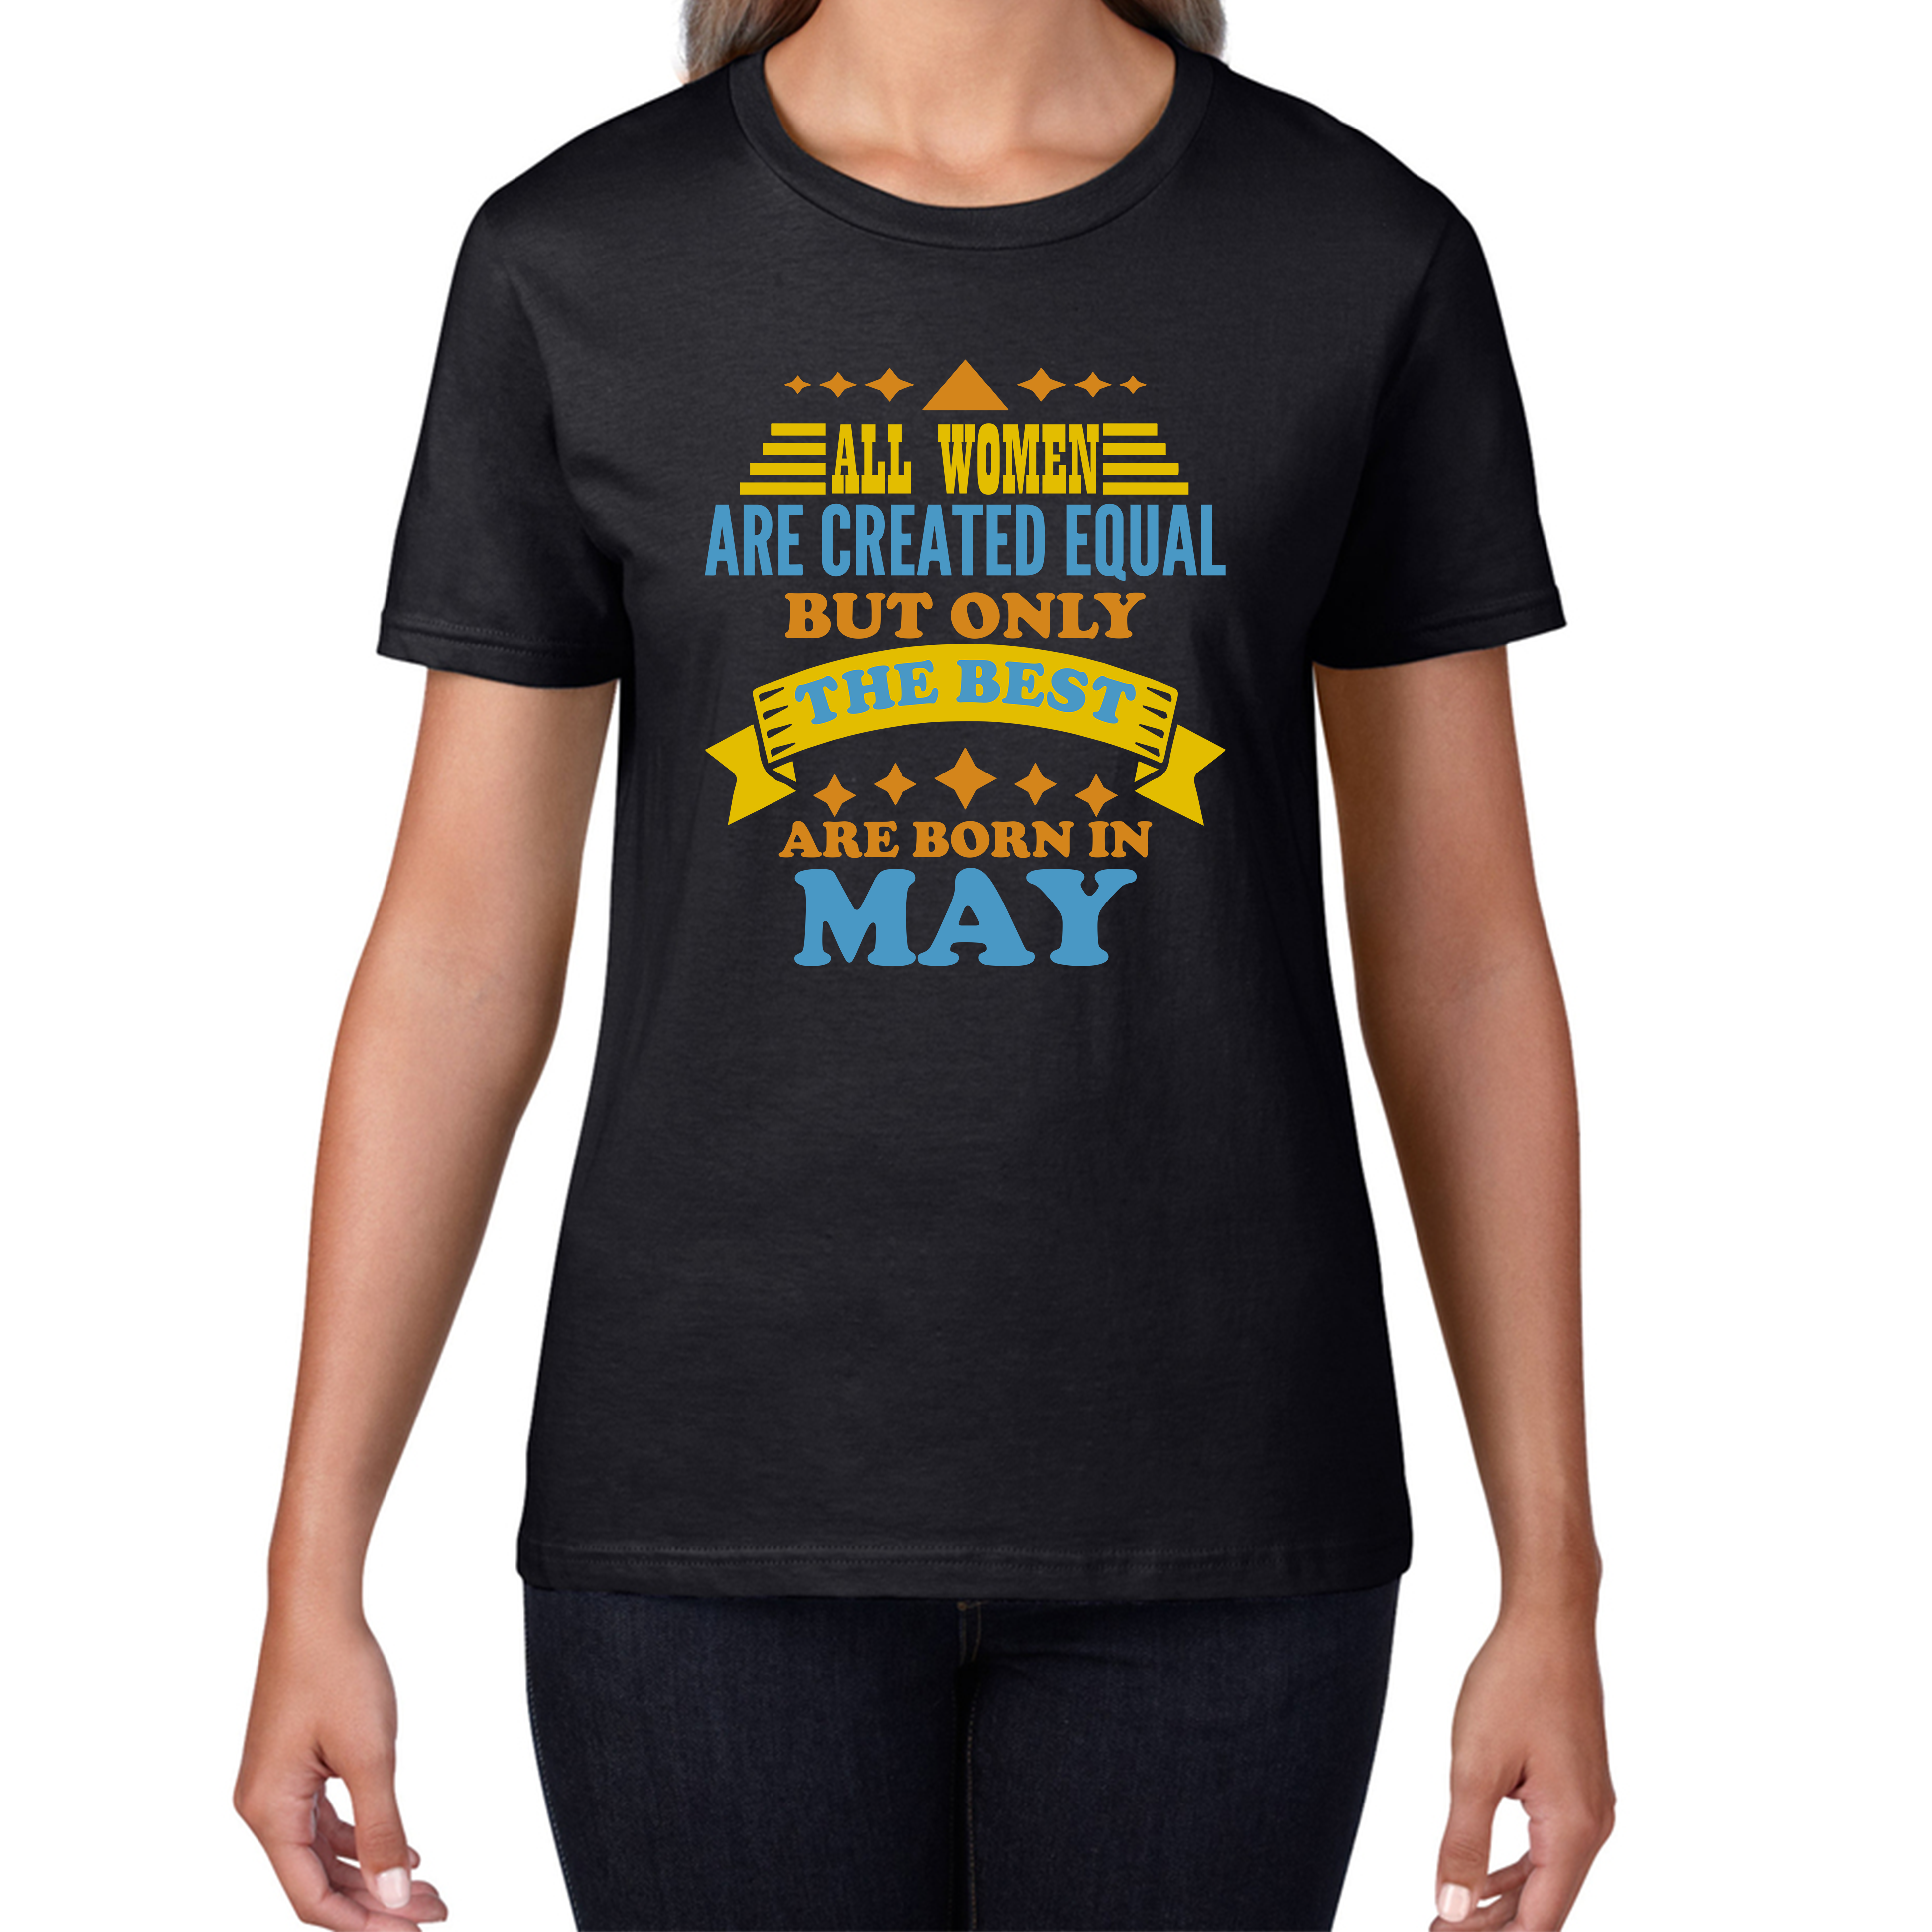 All Women Are Created Equal But Only The Best Are Born In May Funny Birthday Quote Womens Tee Top